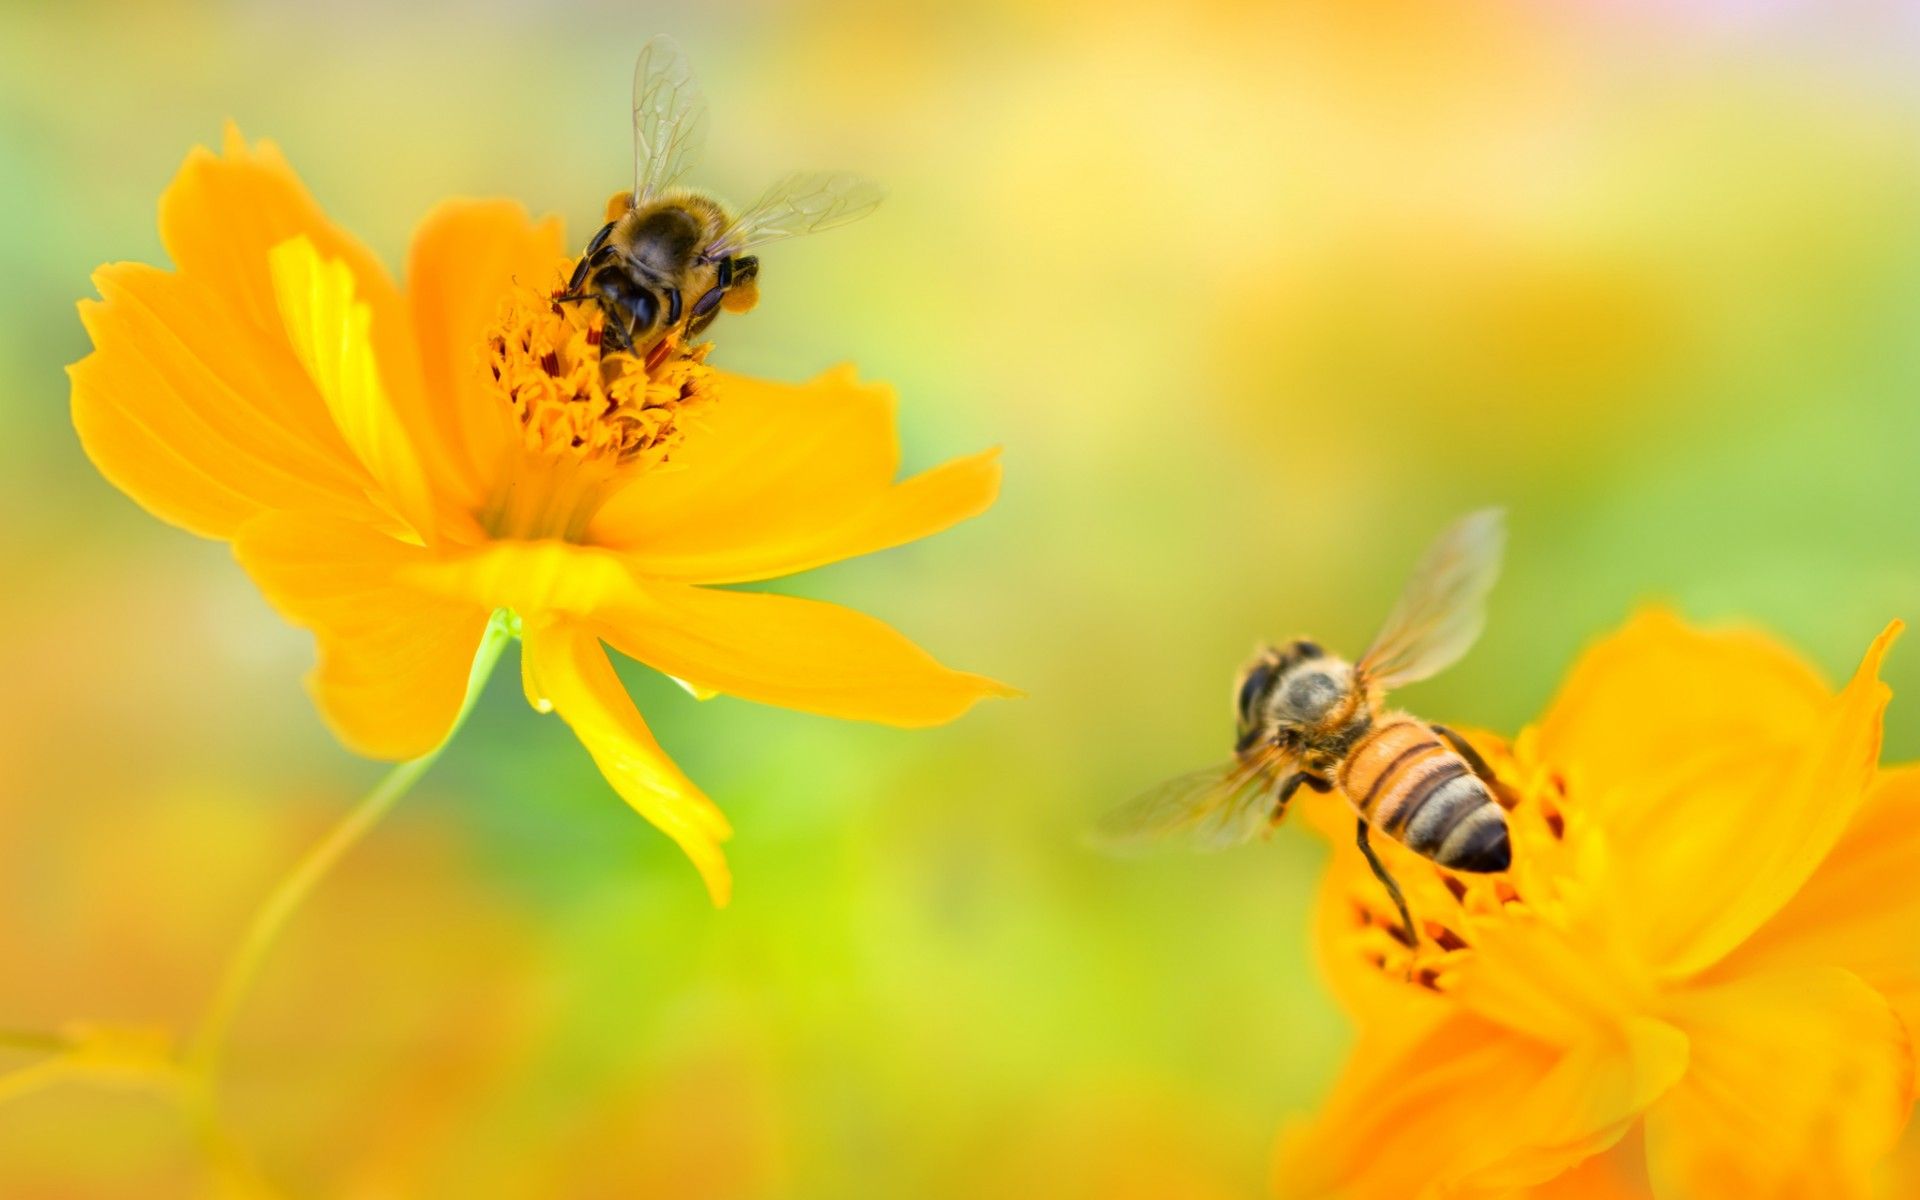 Bees 4K wallpaper for your desktop or mobile screen free and easy to download